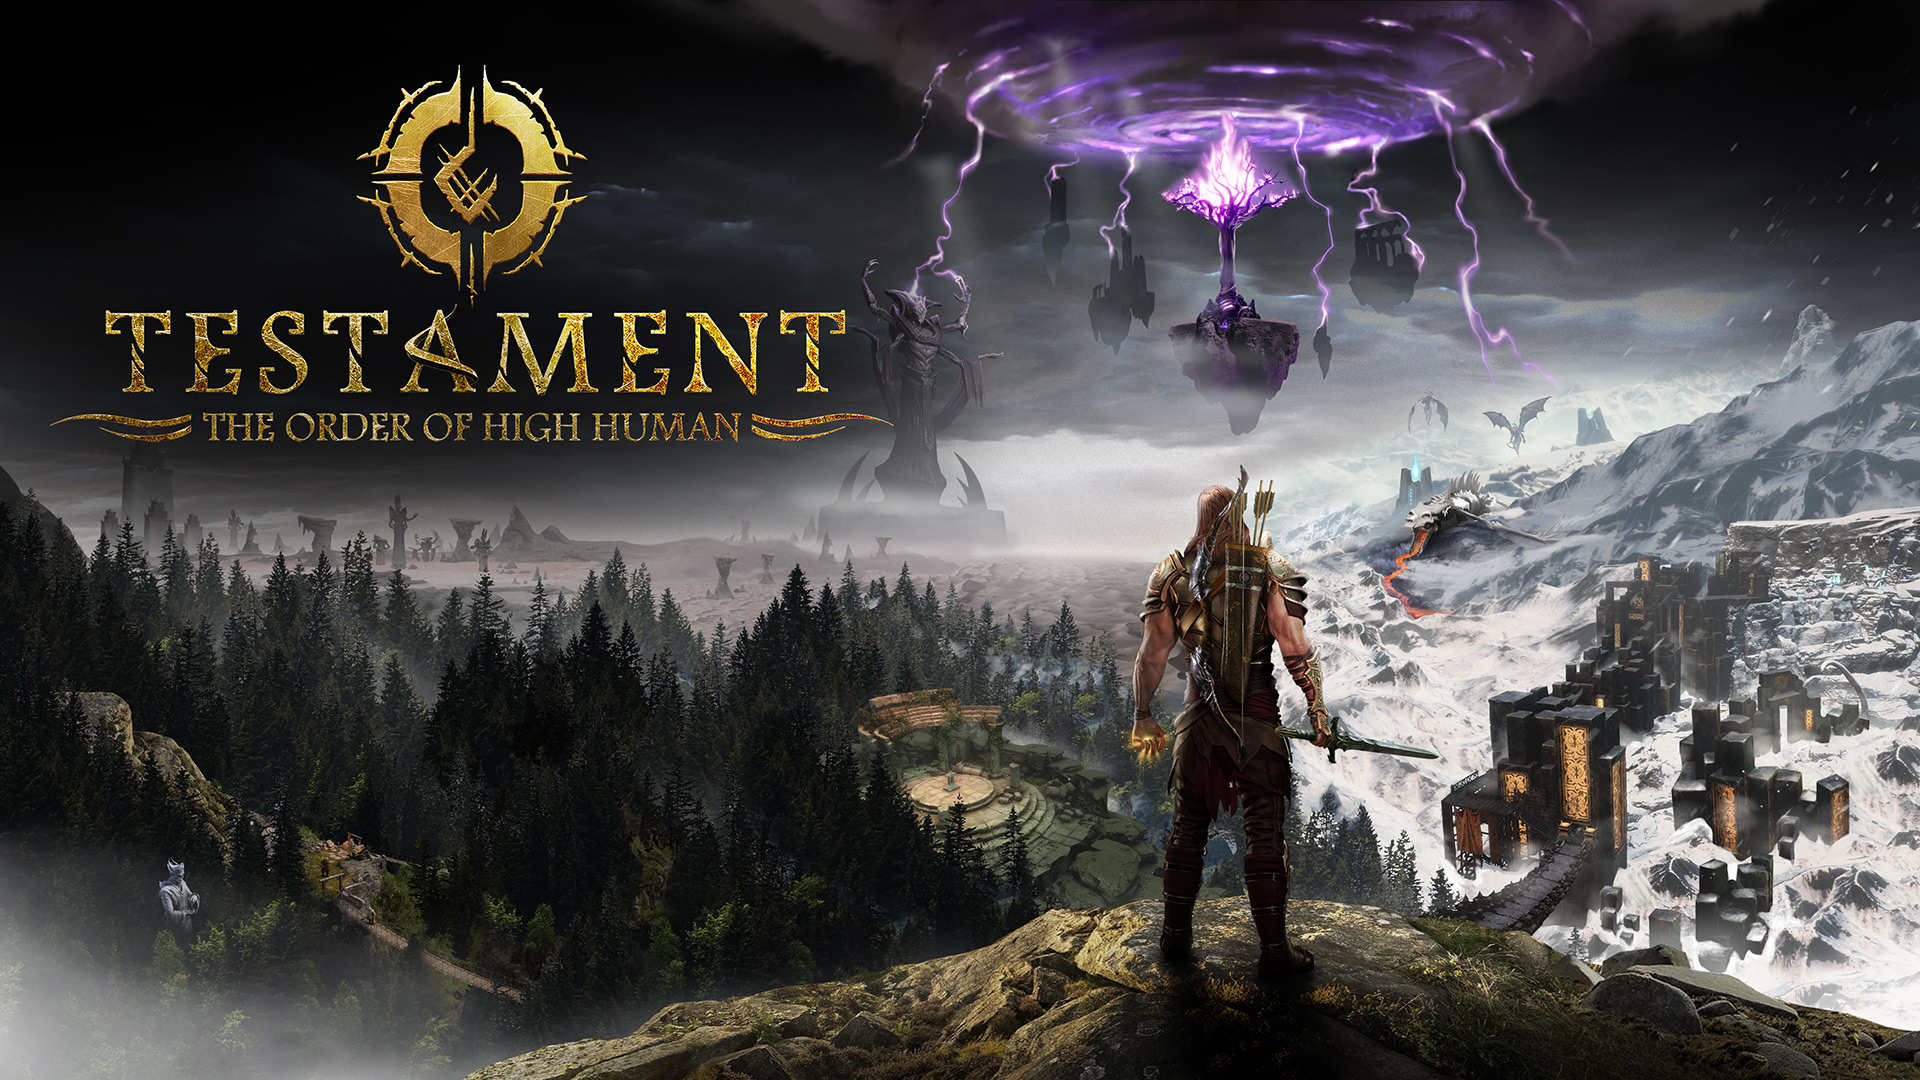 Testament: The Order of High Human is an upcoming action-adventure RPG heading to consoles and PC